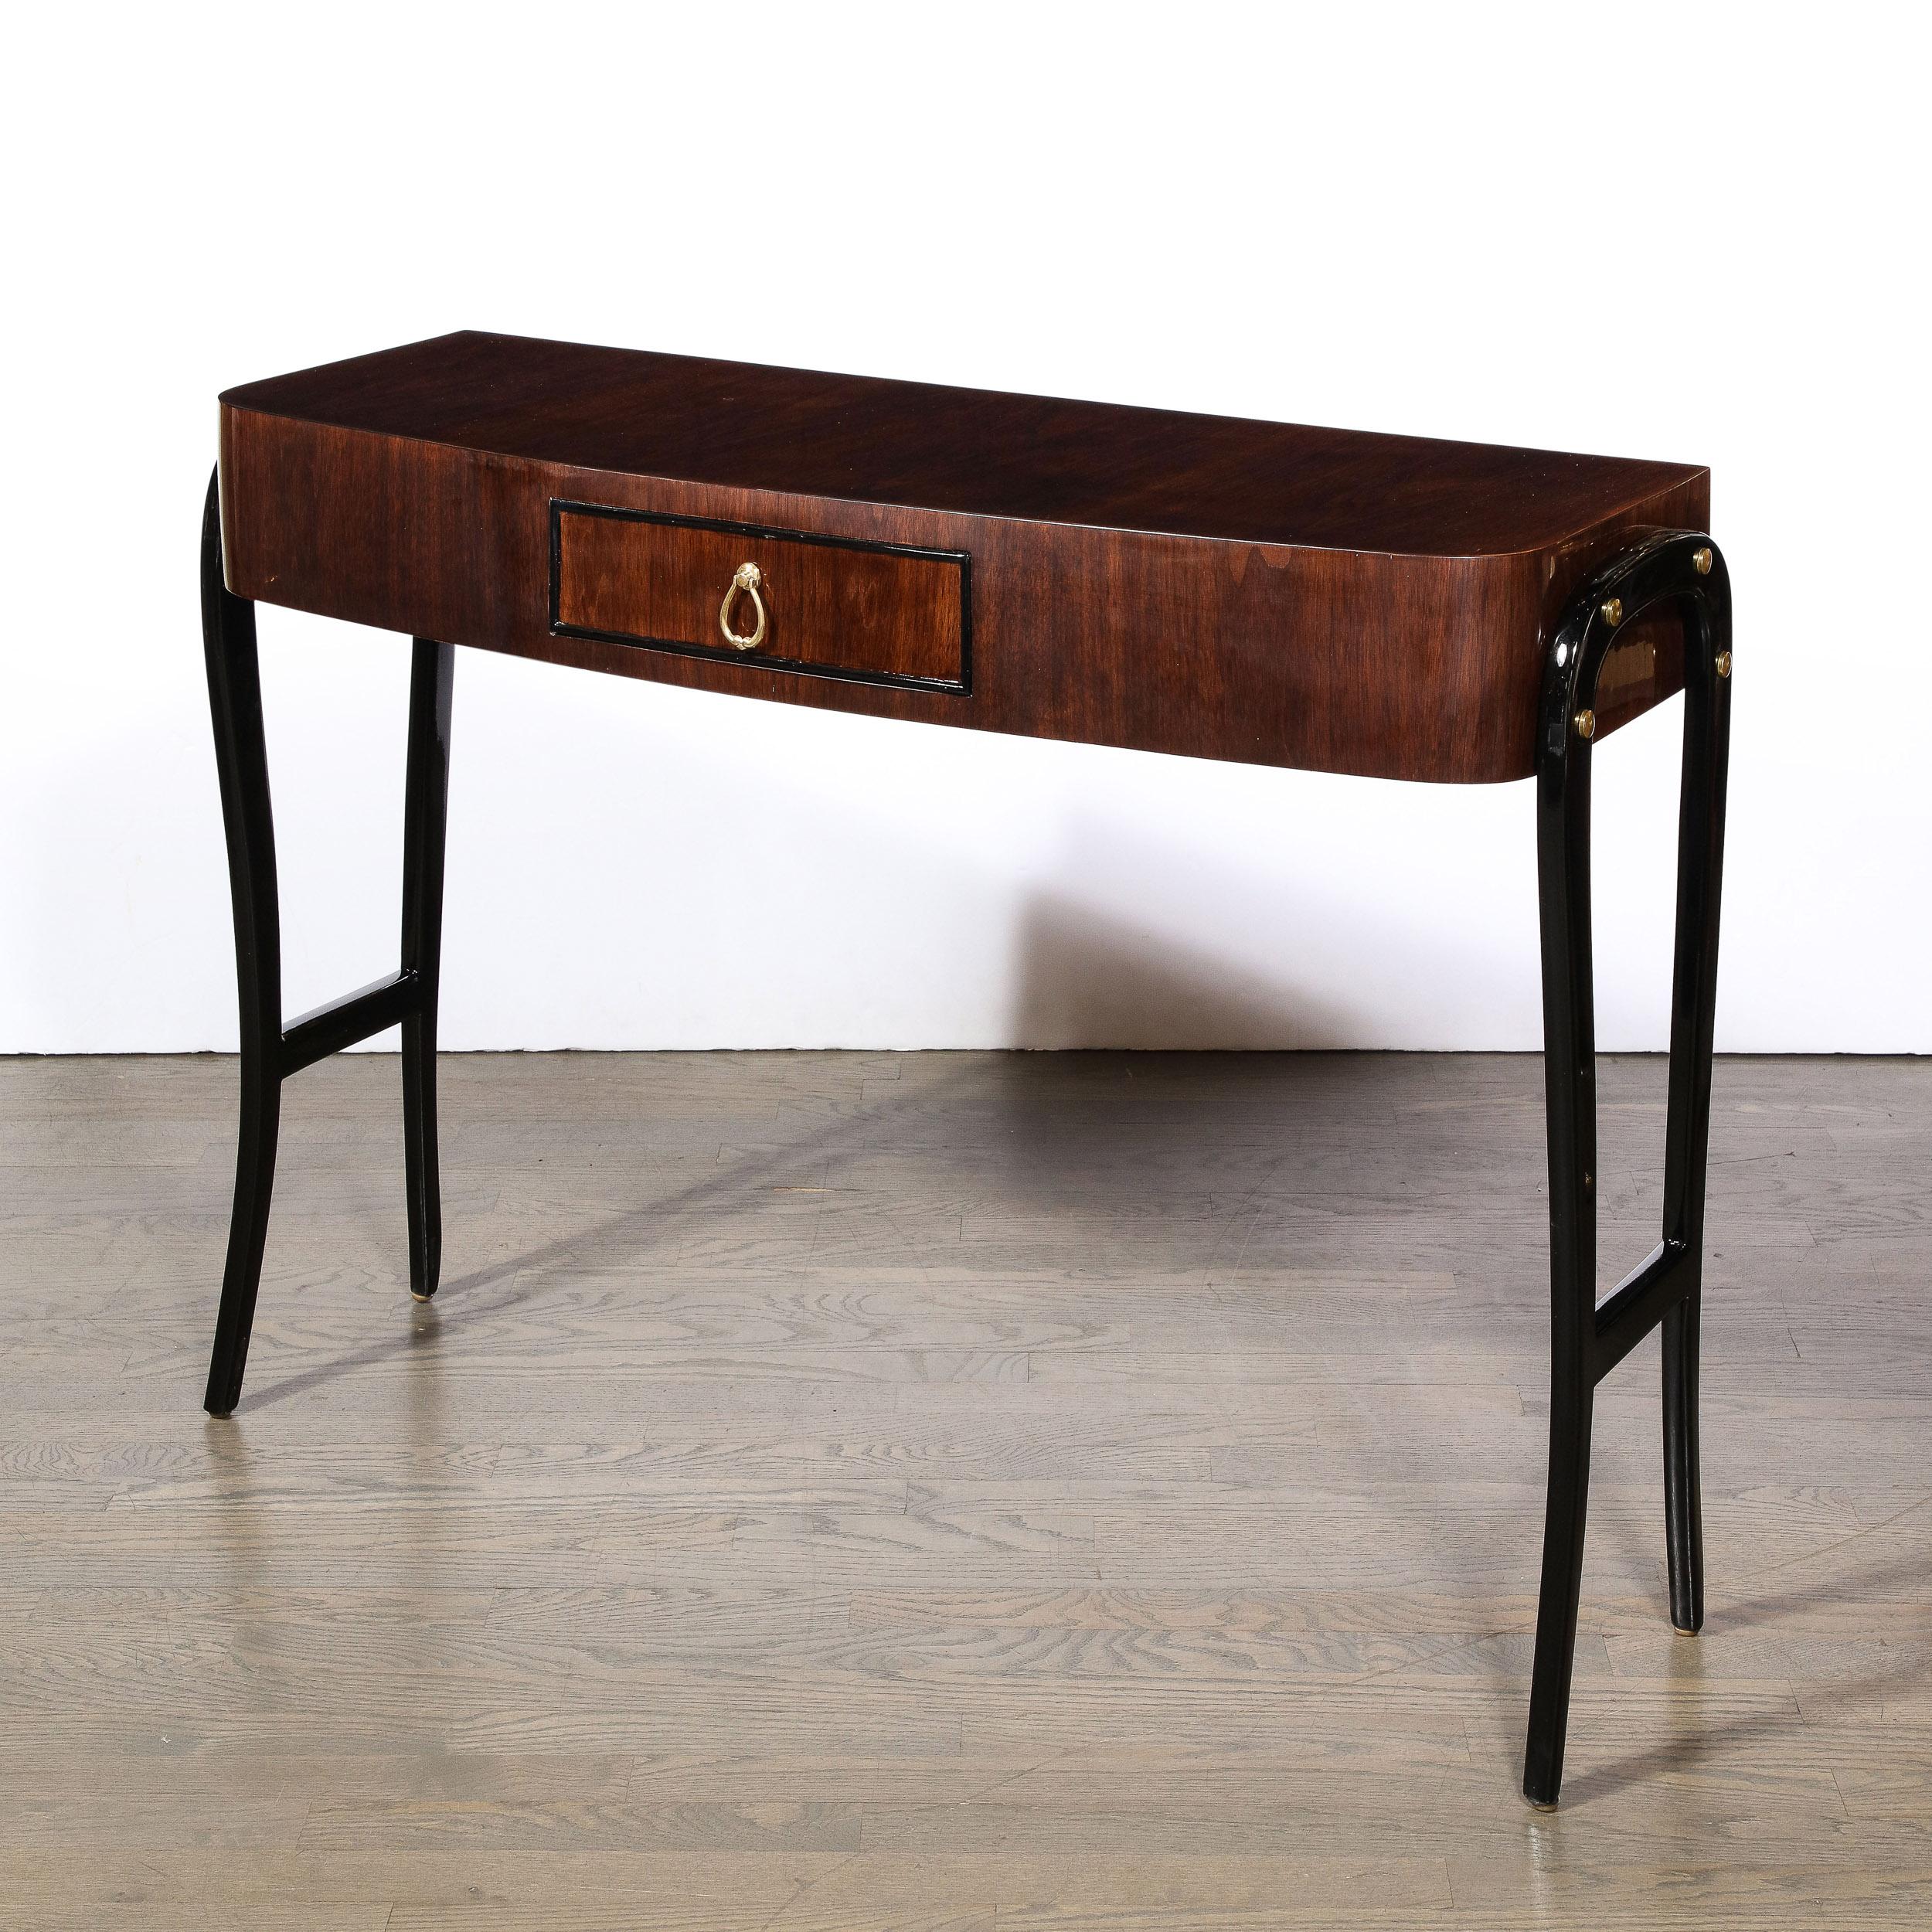 Italian Mid-Century Modernist Walnut & Sculptural Black Lacquer Support Console Table